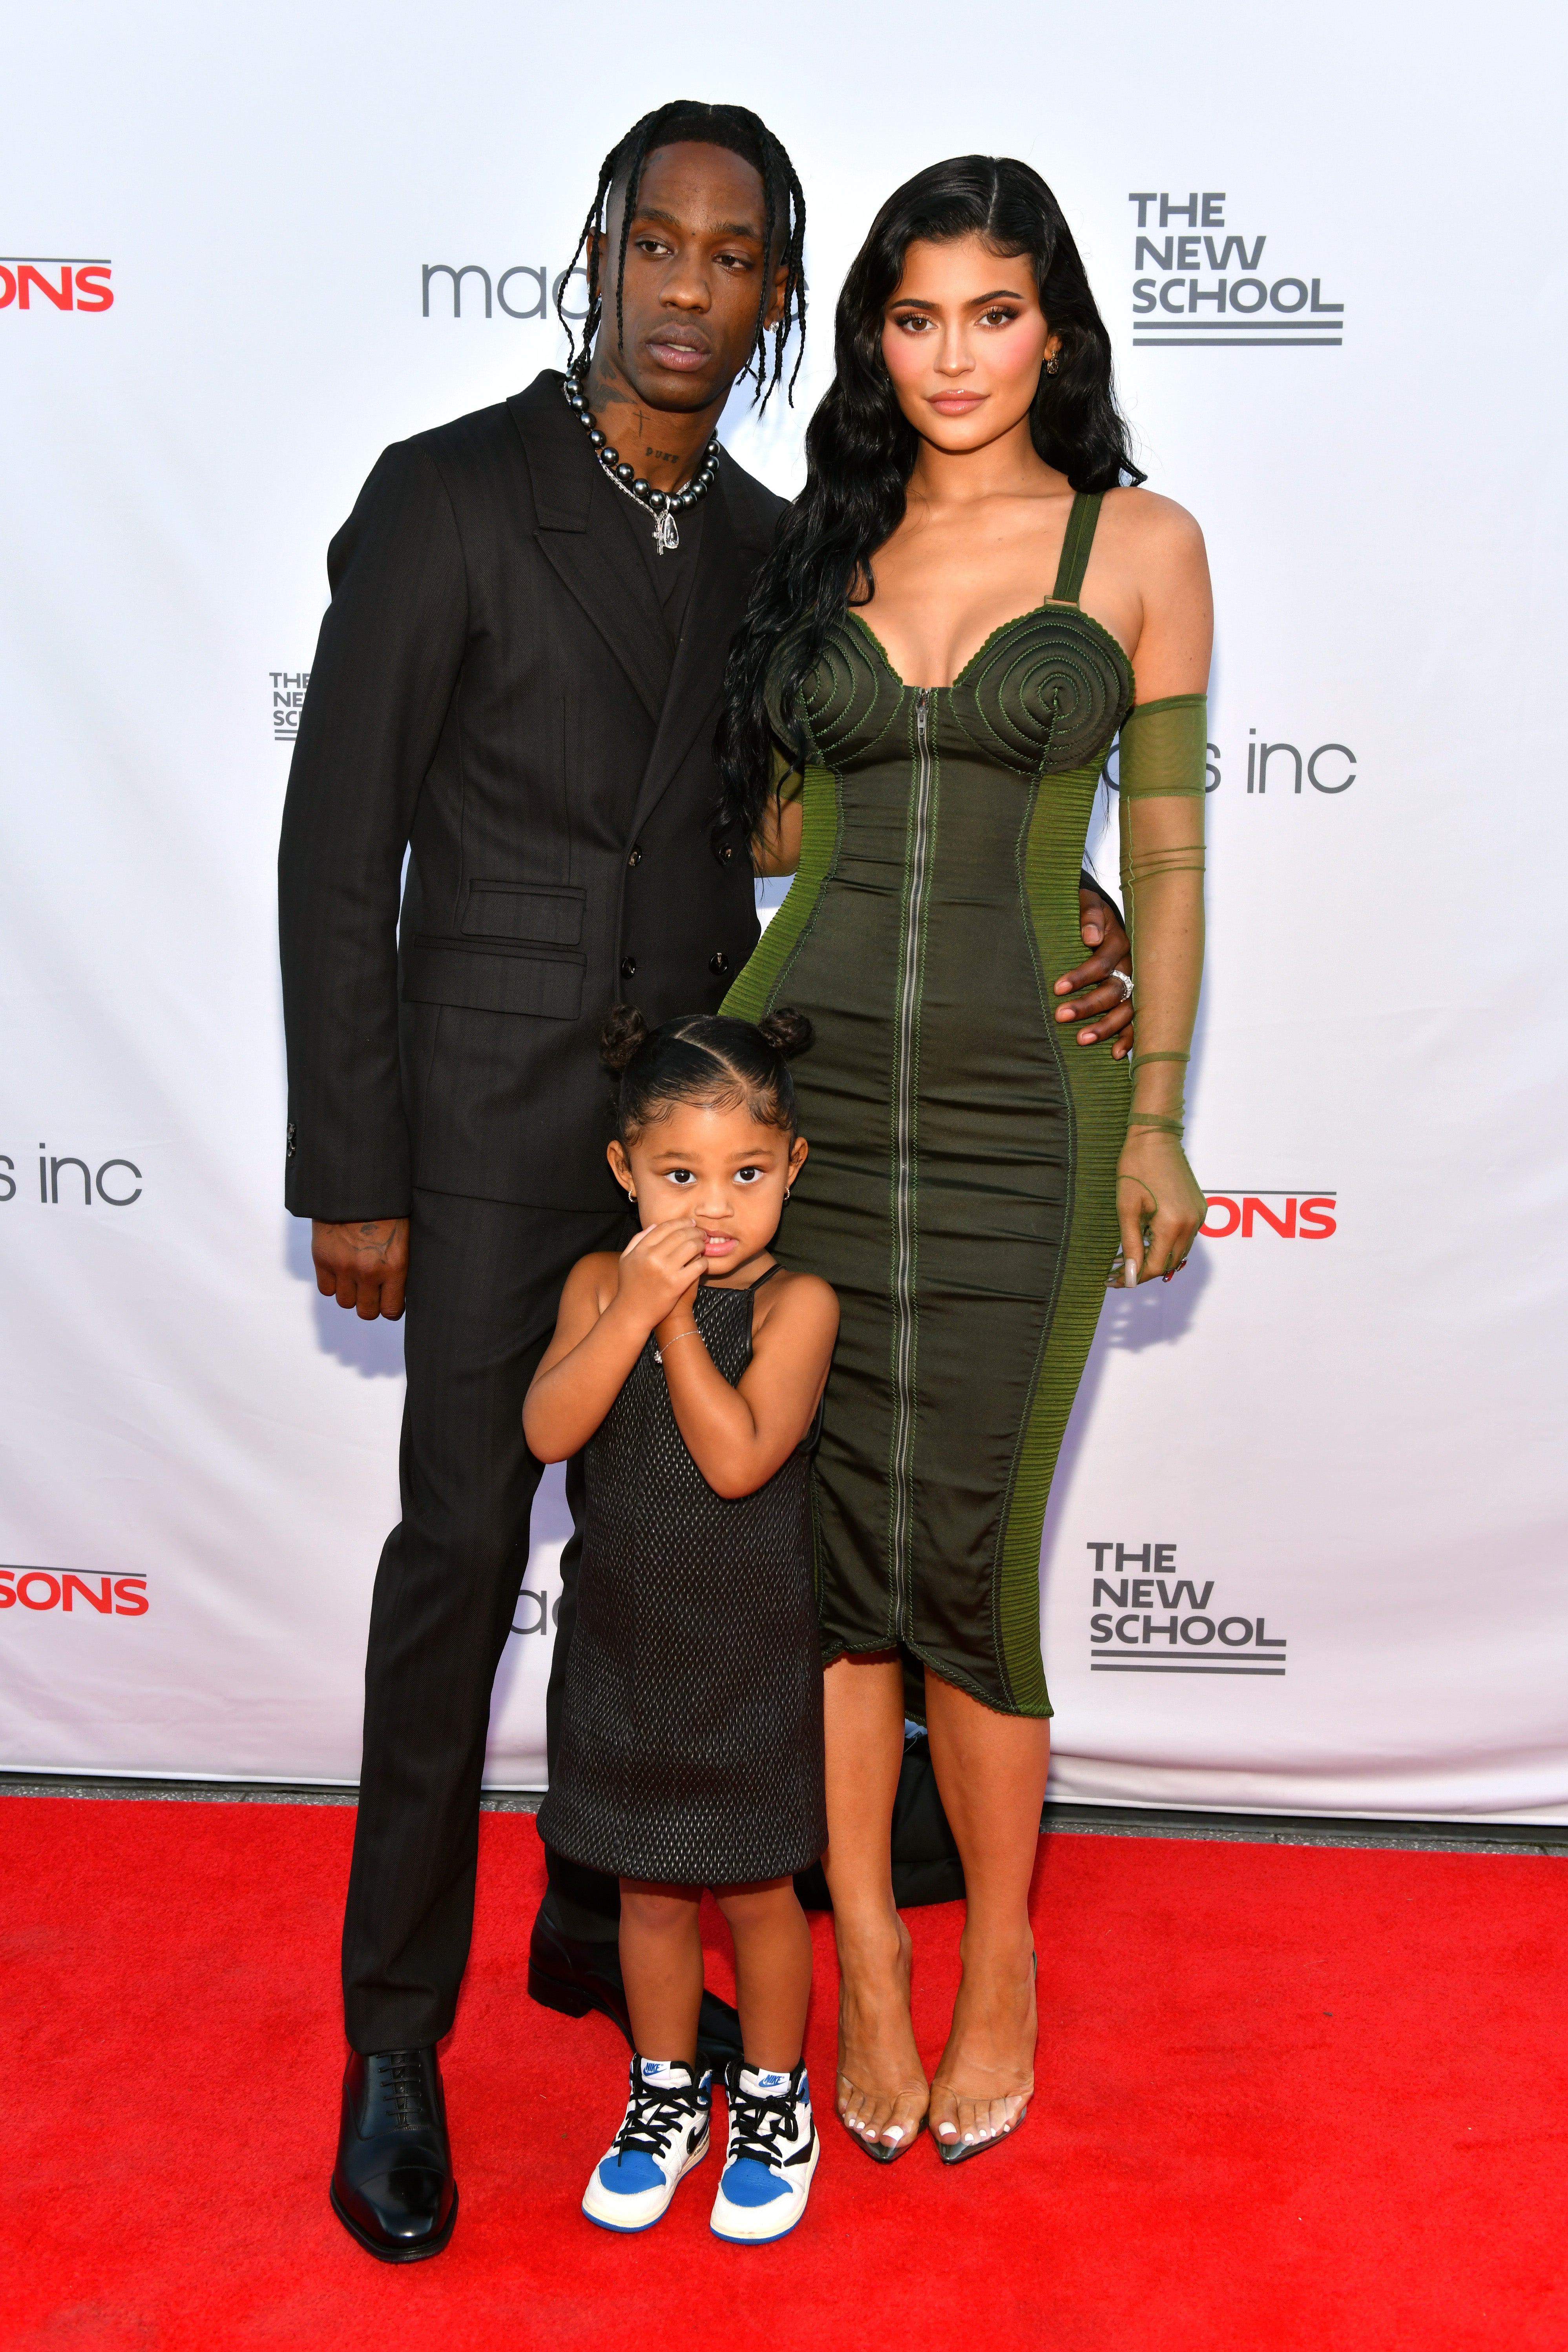 Travis Scott Says He Loves Wifey Kylie Jenner At Red Carpet Event With Stormi Entertainment Tonight photo